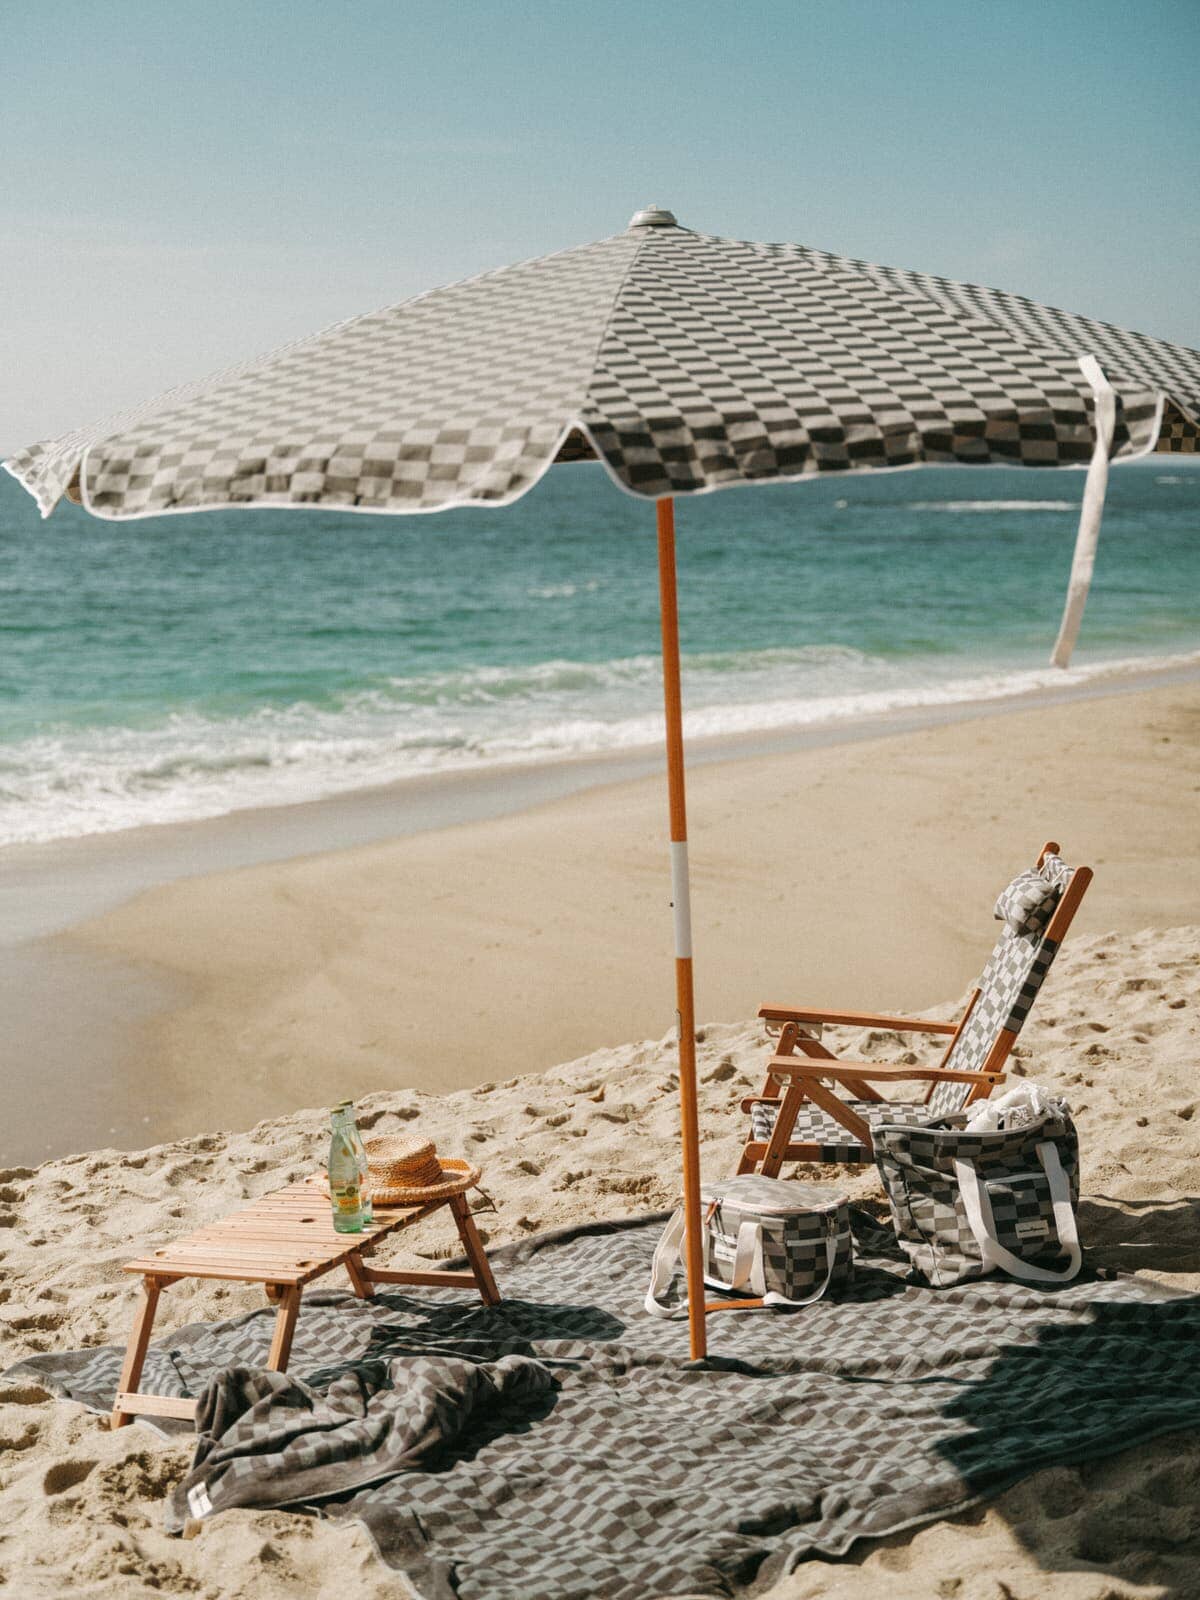 green check amalfi umbrella on the beach with chair and accessories